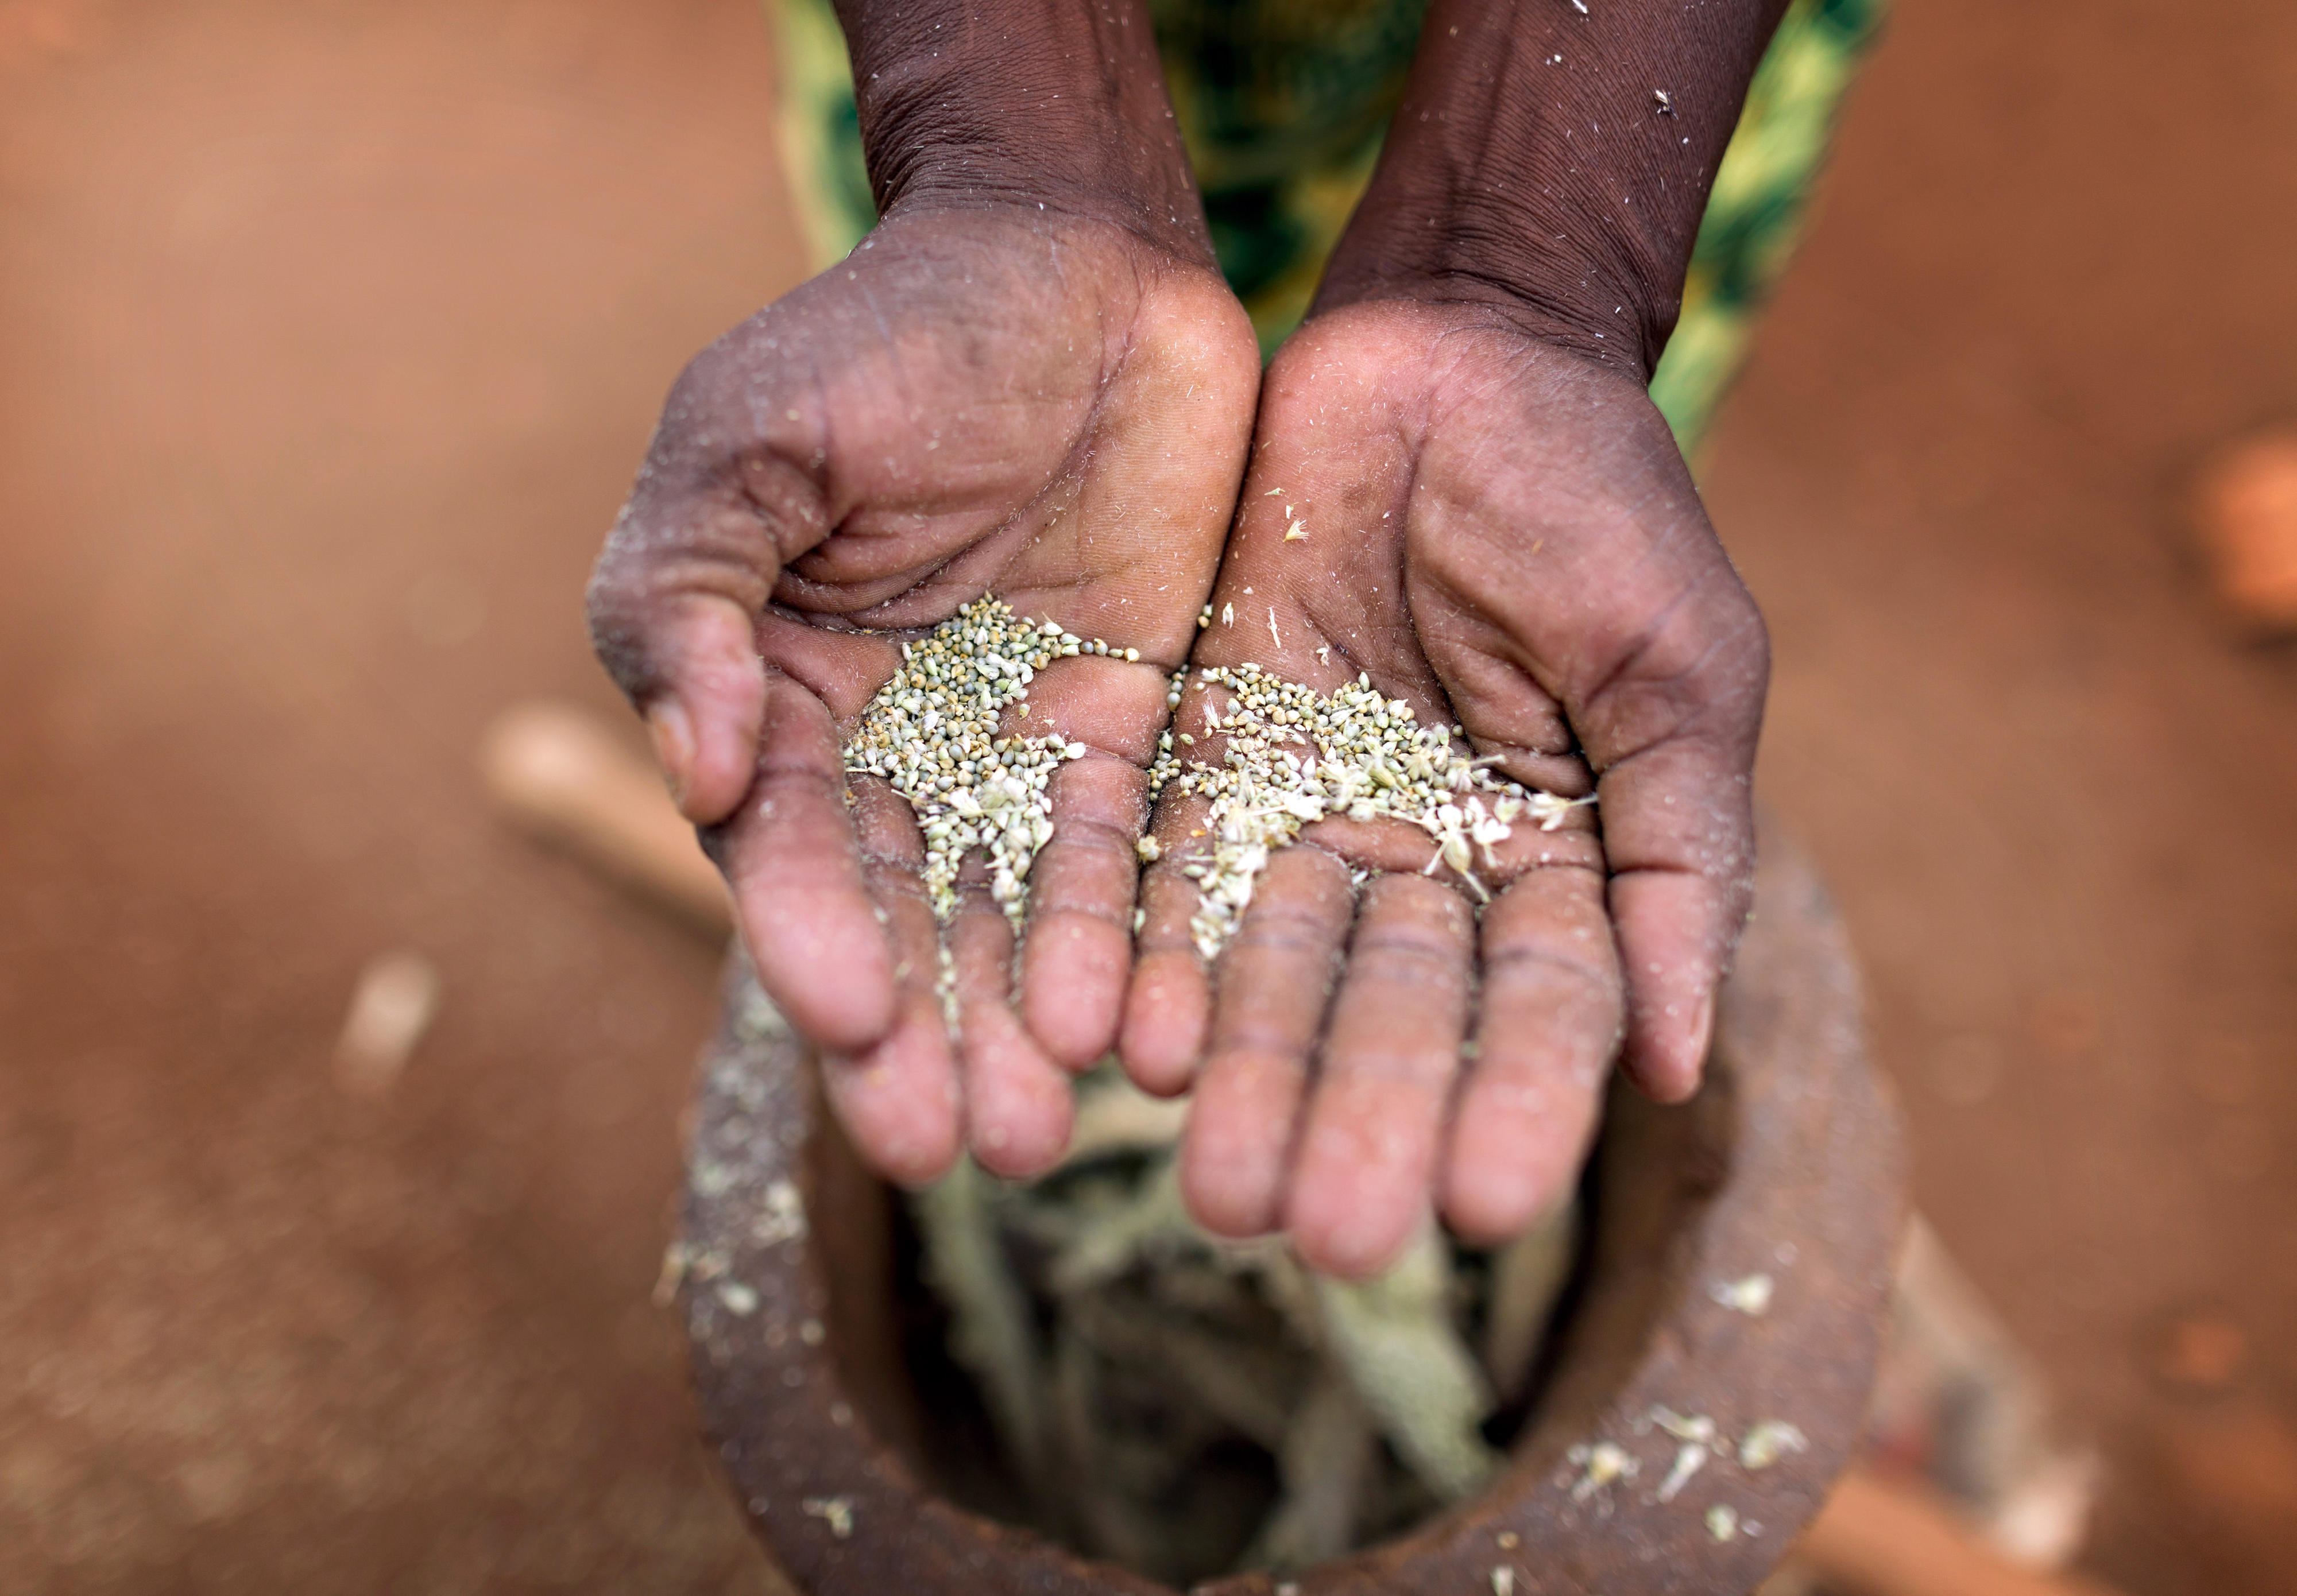 A woman shows the result after pounding millet on a smallholder farm in Ishiara, Kenya.